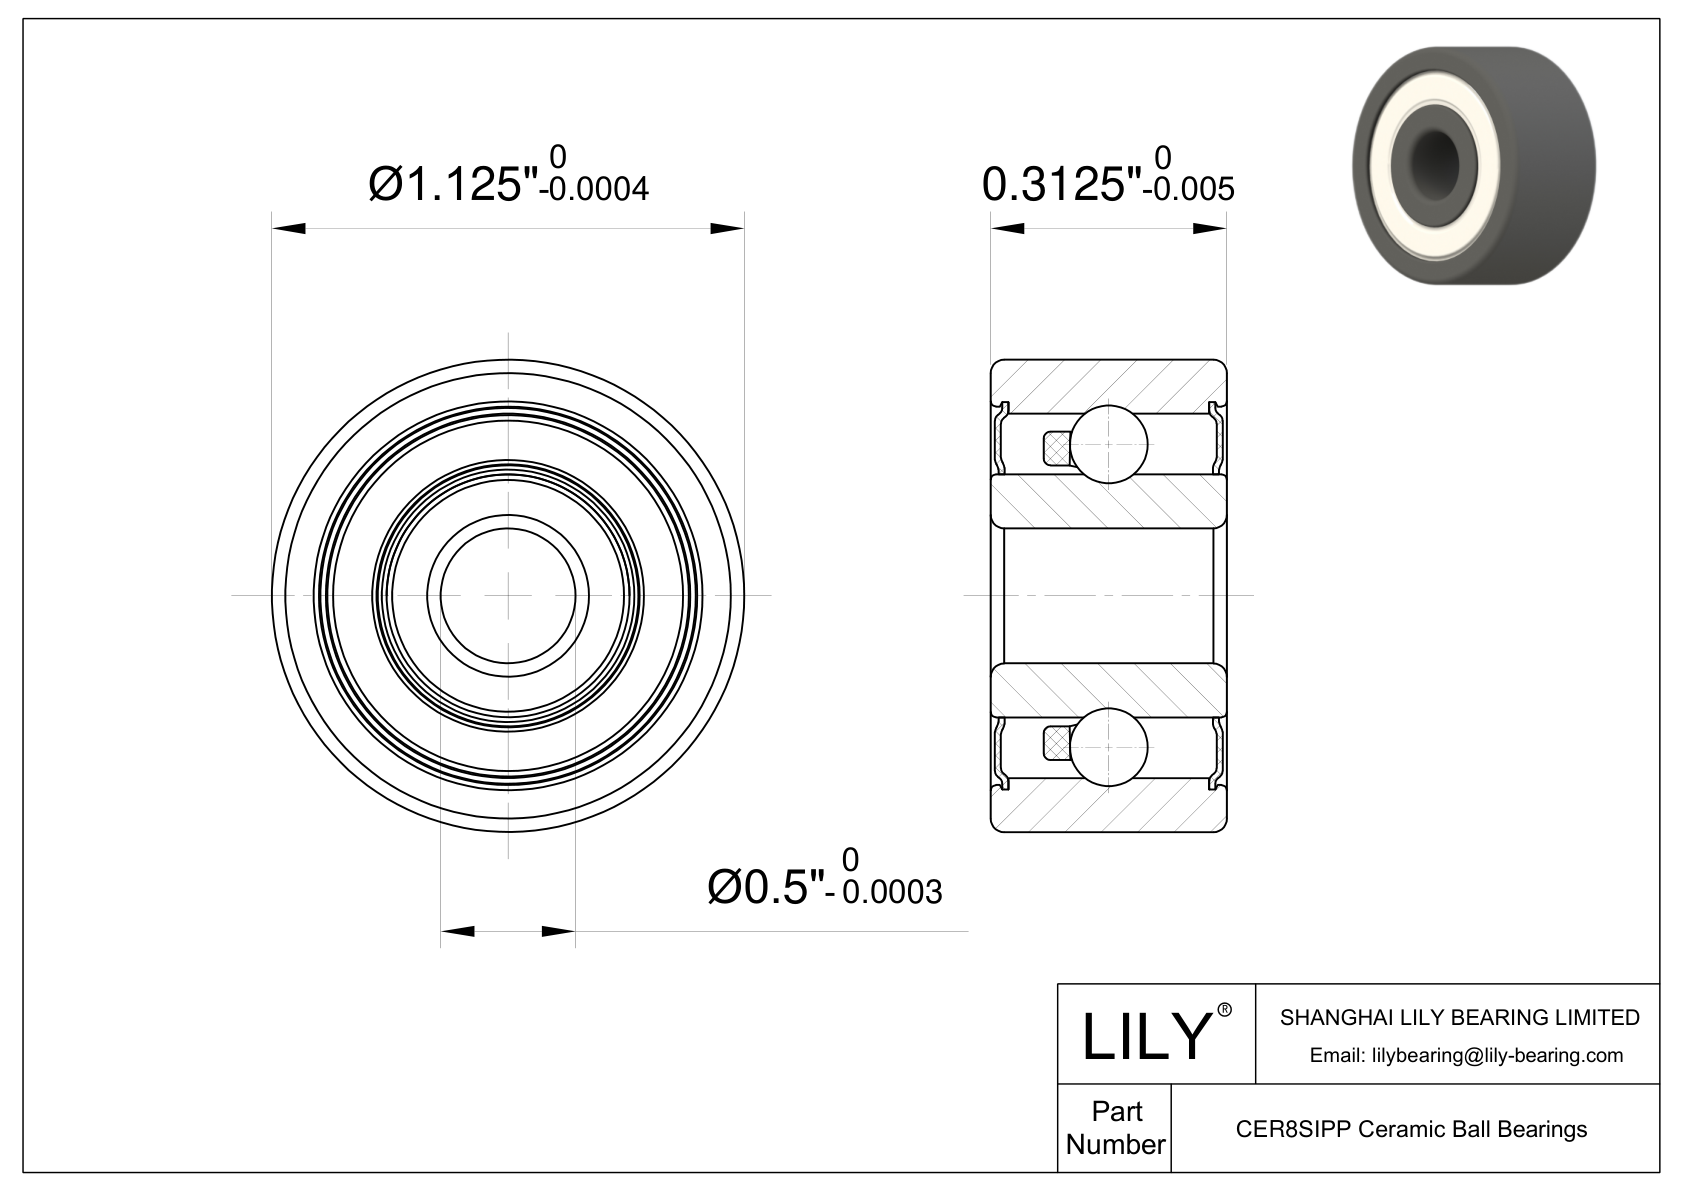 CESI R8 2RS Inch Size Silicon Nitride Ceramic Bearings cad drawing